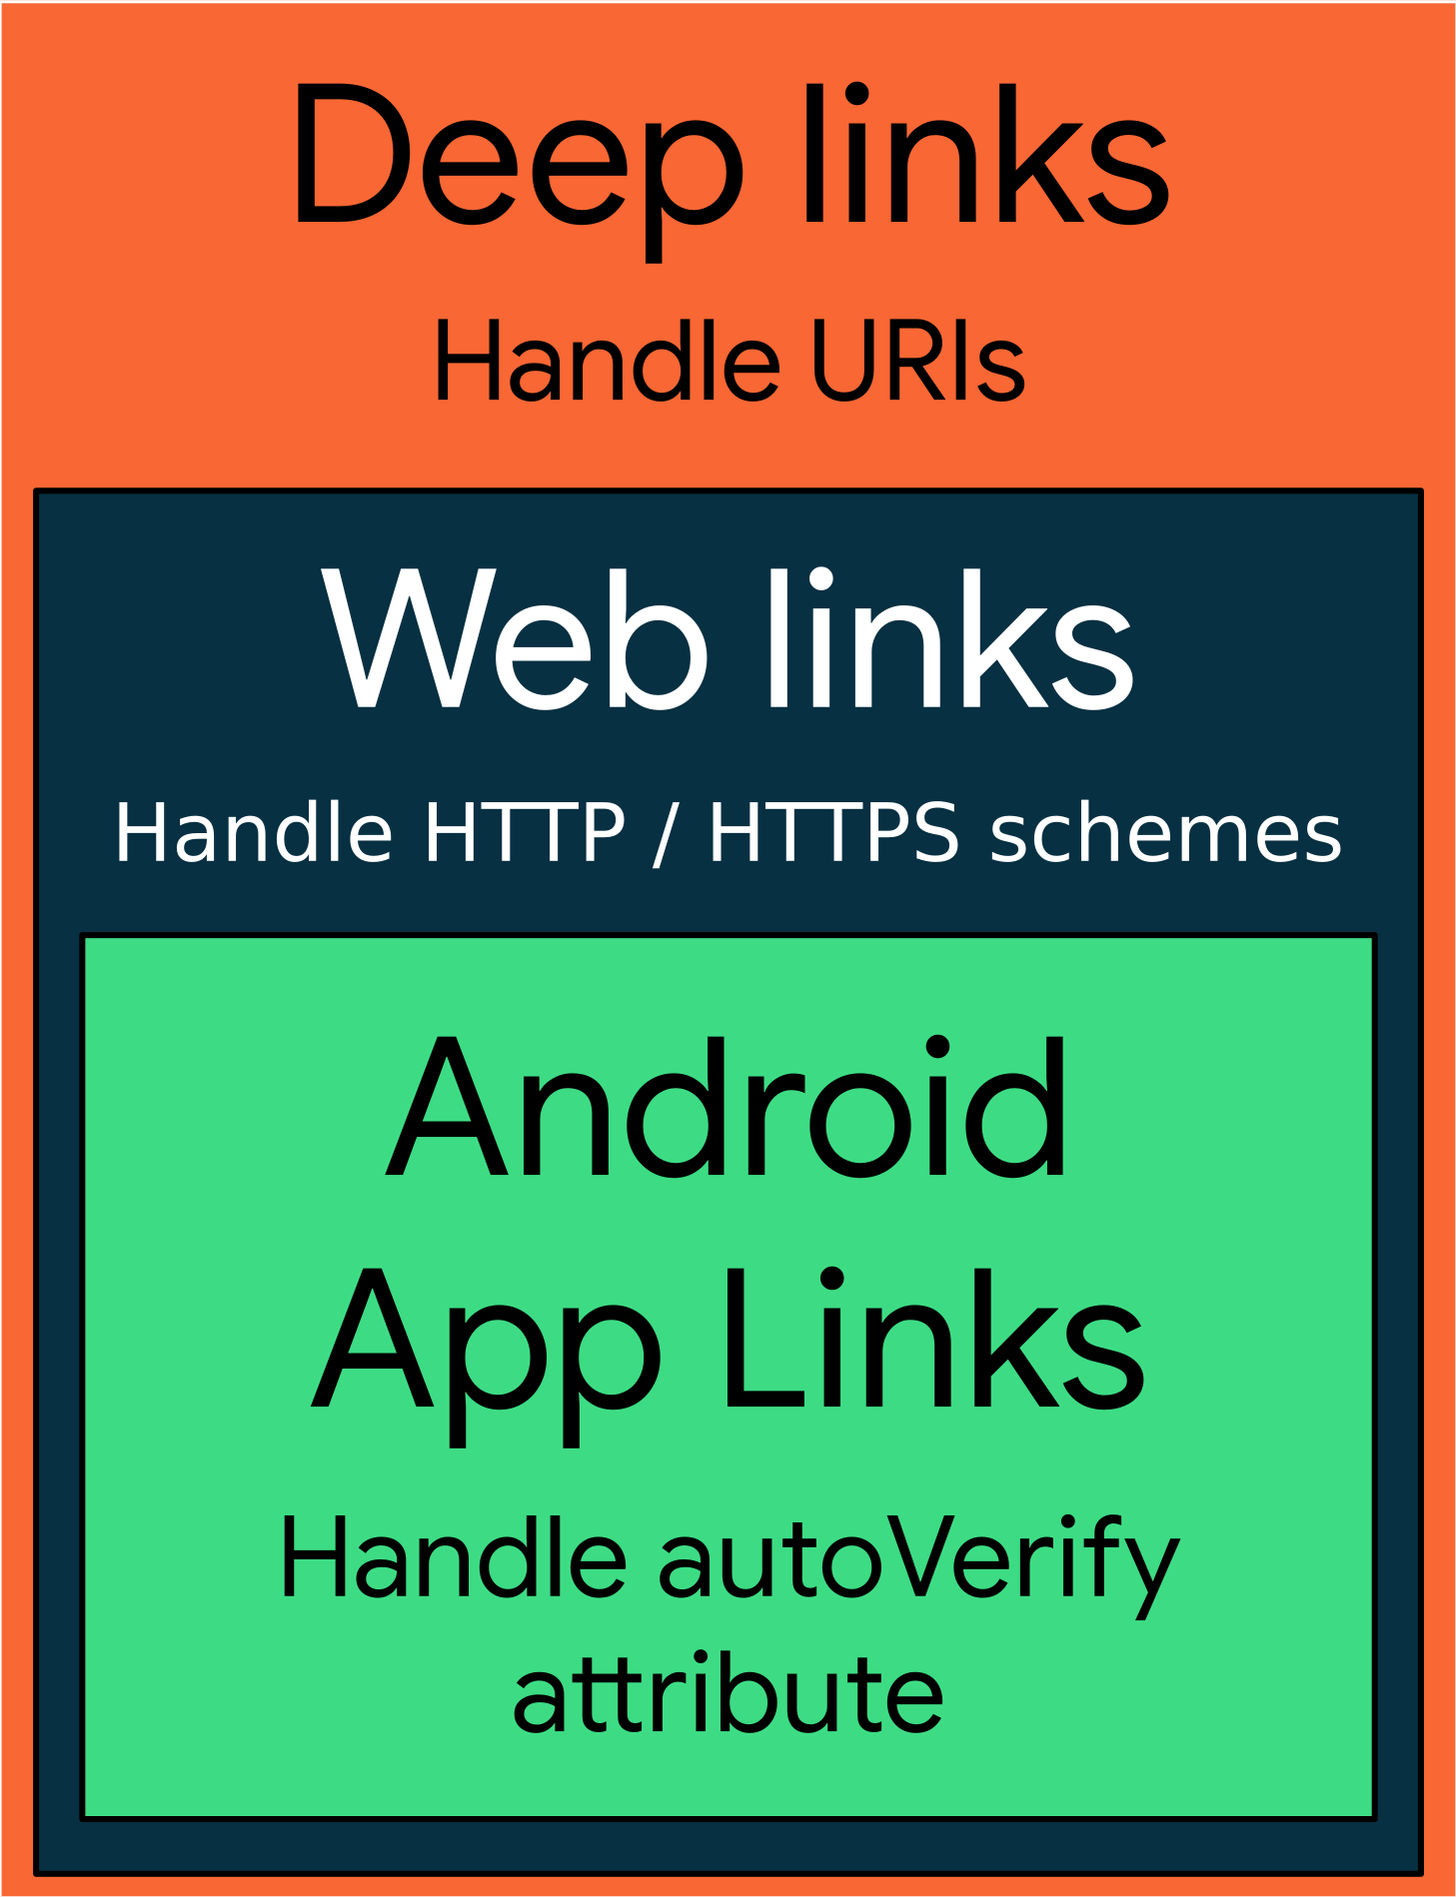 Deep links handle content URIs. Web links handle the
         HTTP and HTTPS schemes. Android App Links handle the autoVerify
         attribute.